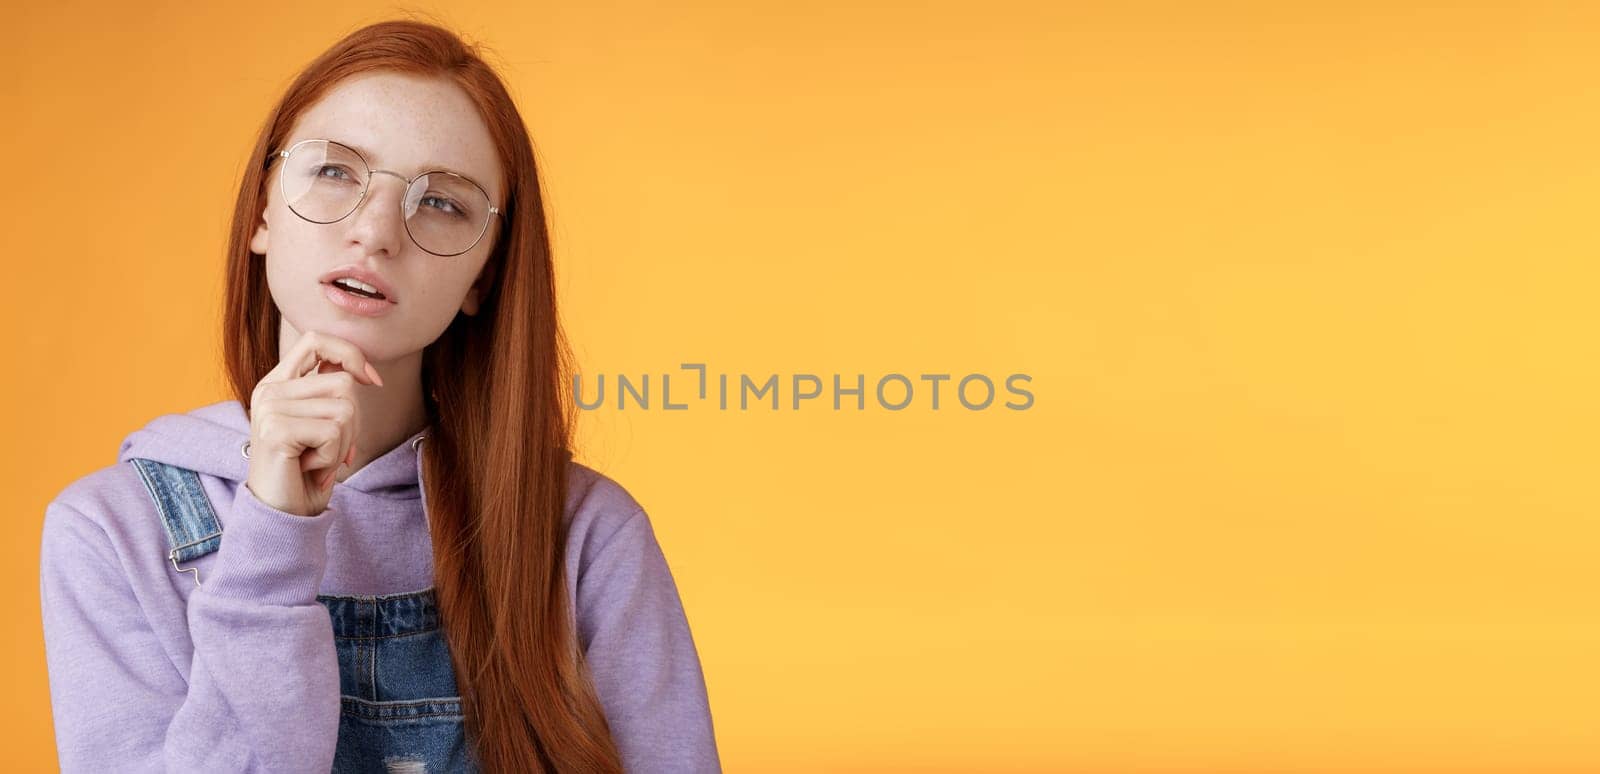 Thoughtful young creative smart redhead girl thinking figure out important thing standing upper left corner squinting thinking get clue touch chin thinking, pondering choice, orange background.